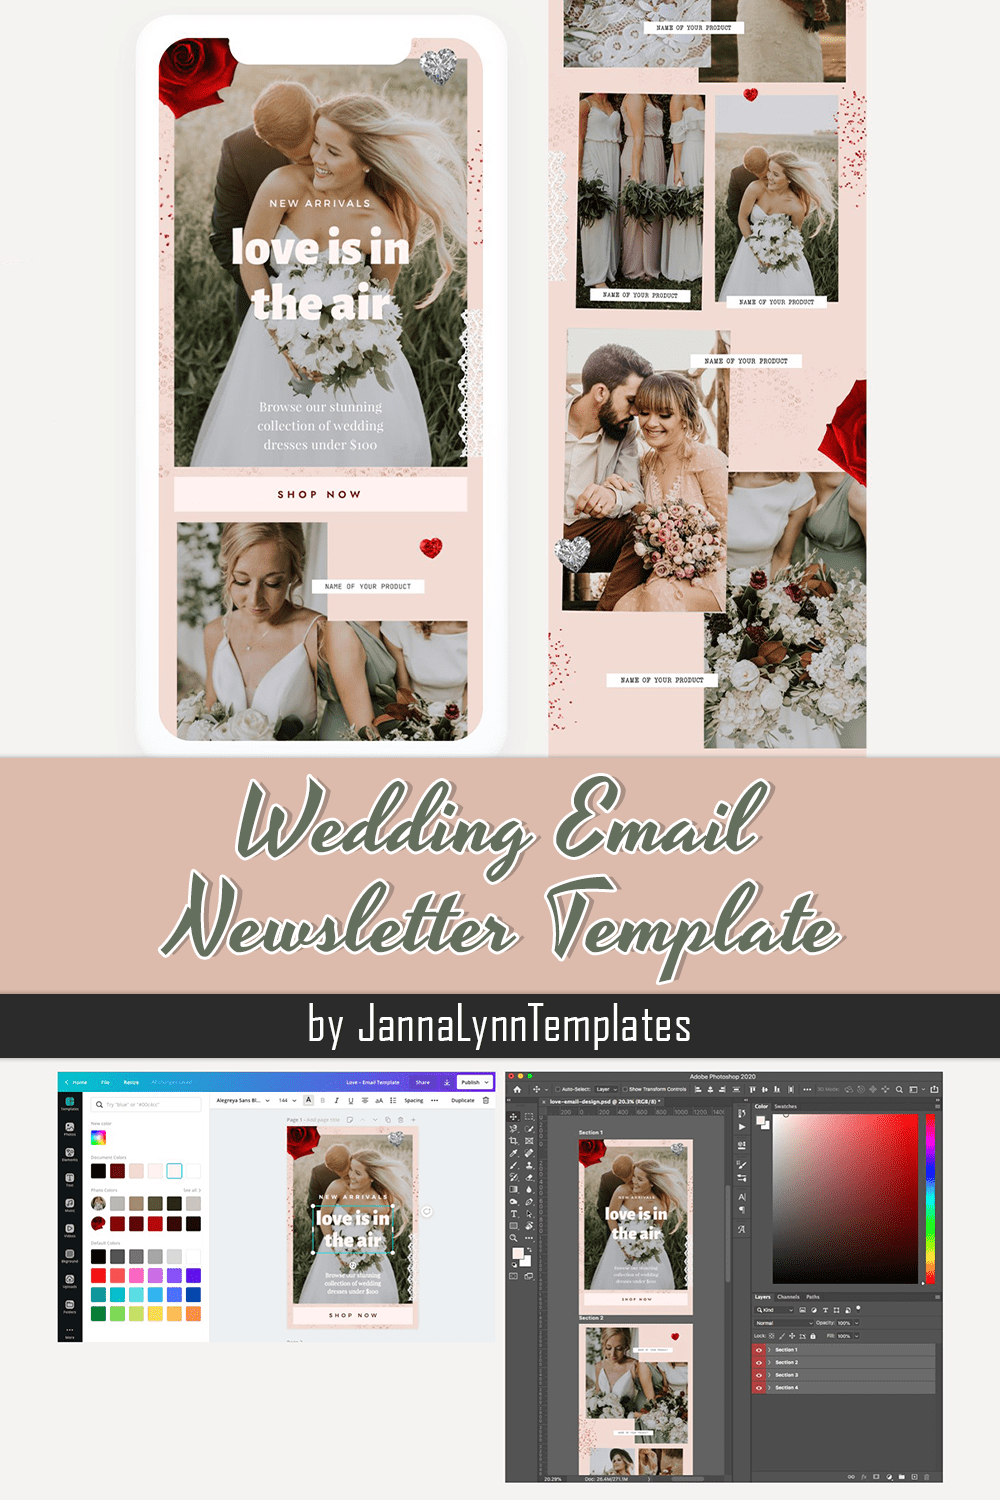 Collection of images of beautiful wedding email newsletter template.